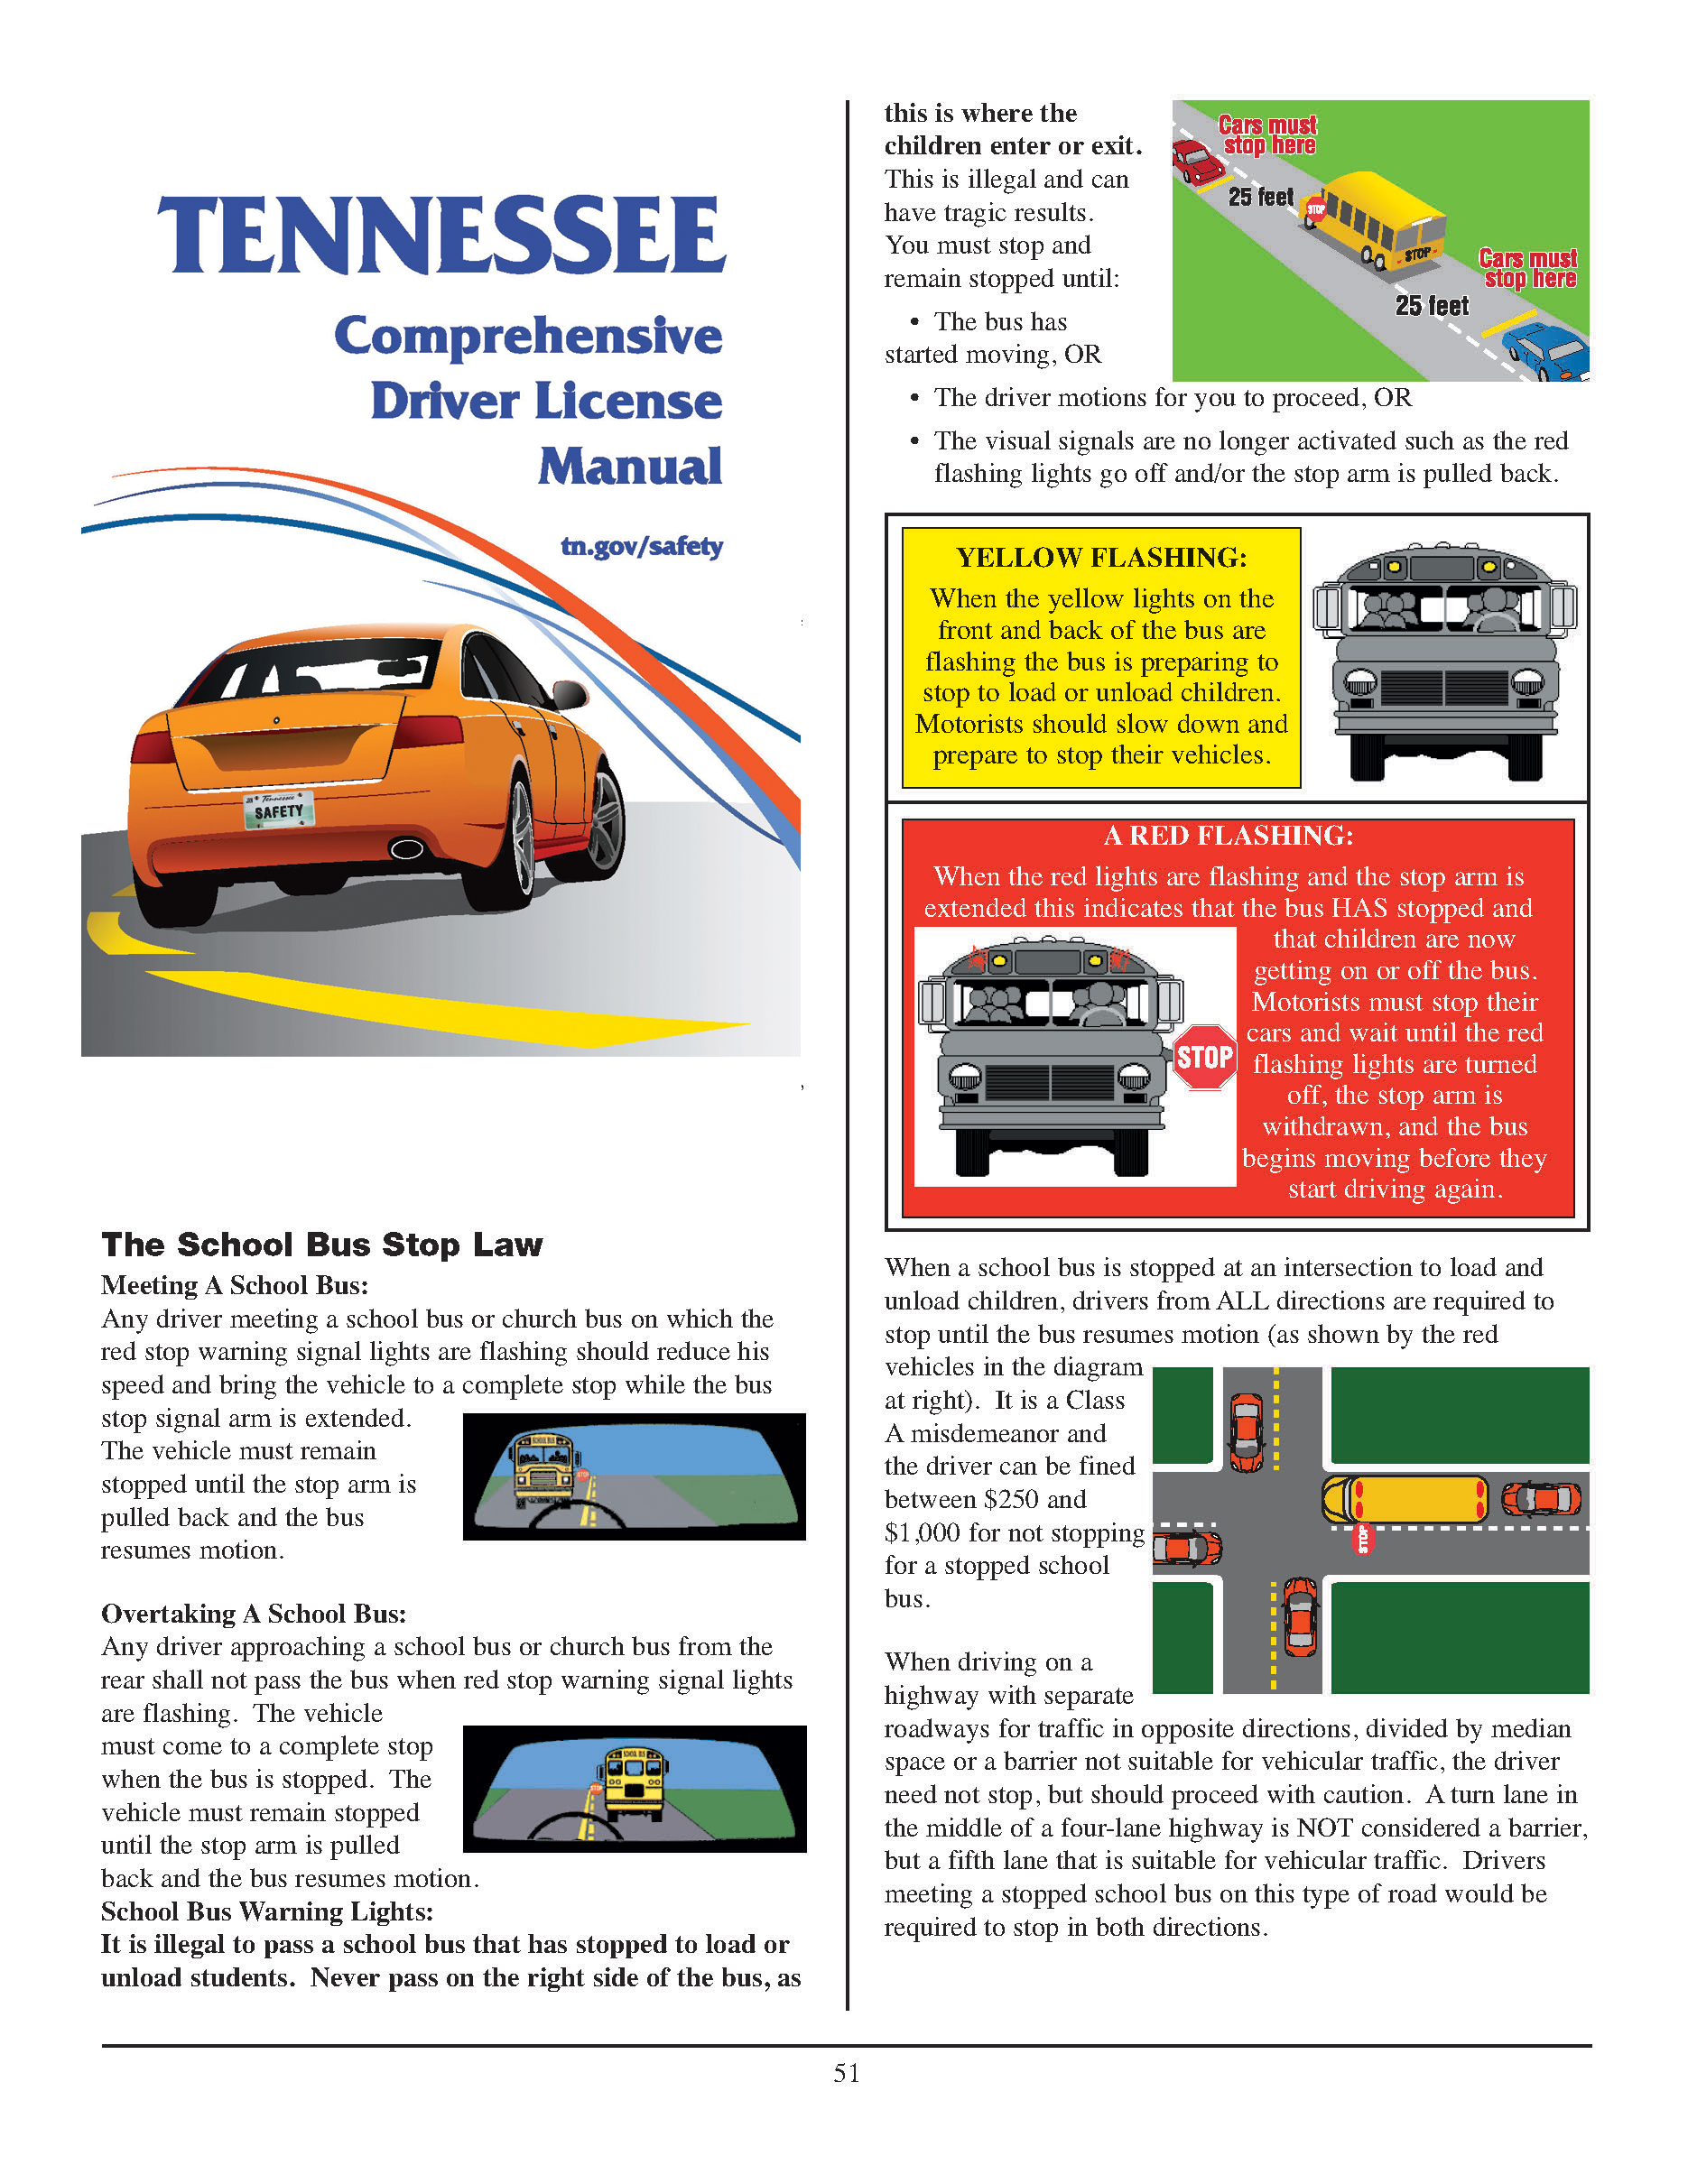 The Tennessee School Bus Stop Law - This is the law for a stopped school bus in the State of Tennessee and how to handle when you see that school bus stopped. #schoolbus